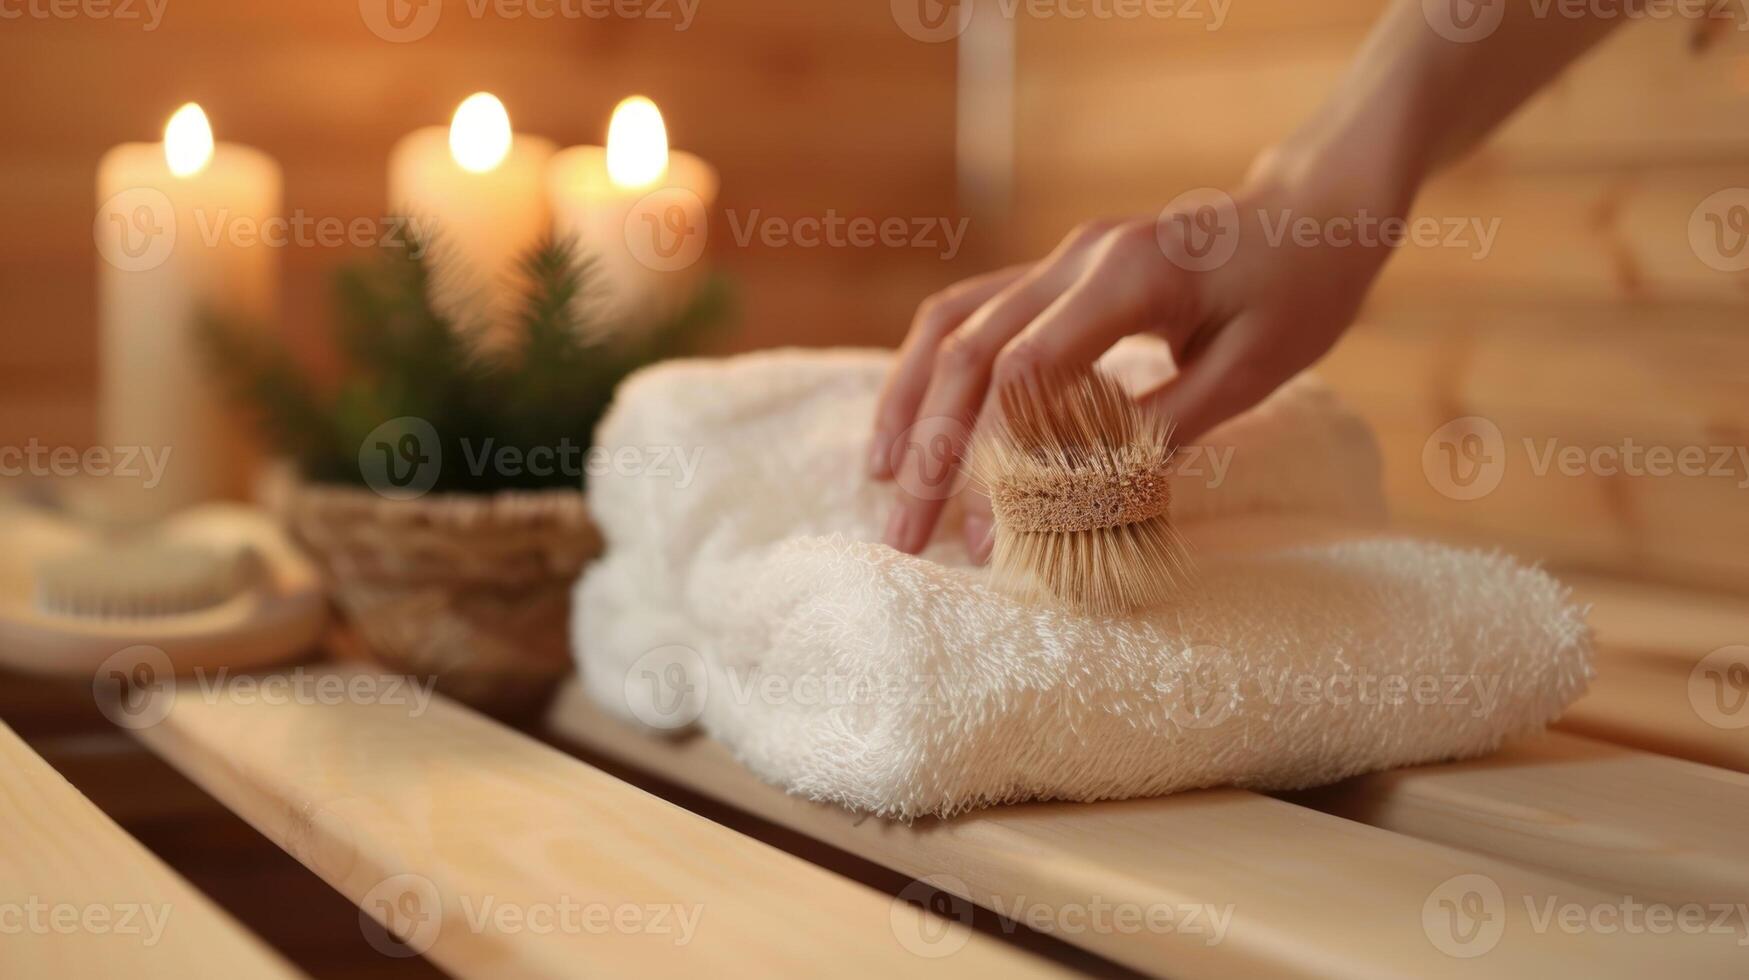 A hand using a dry brush to stimulate lymphatic drainage before entering the sauna. photo